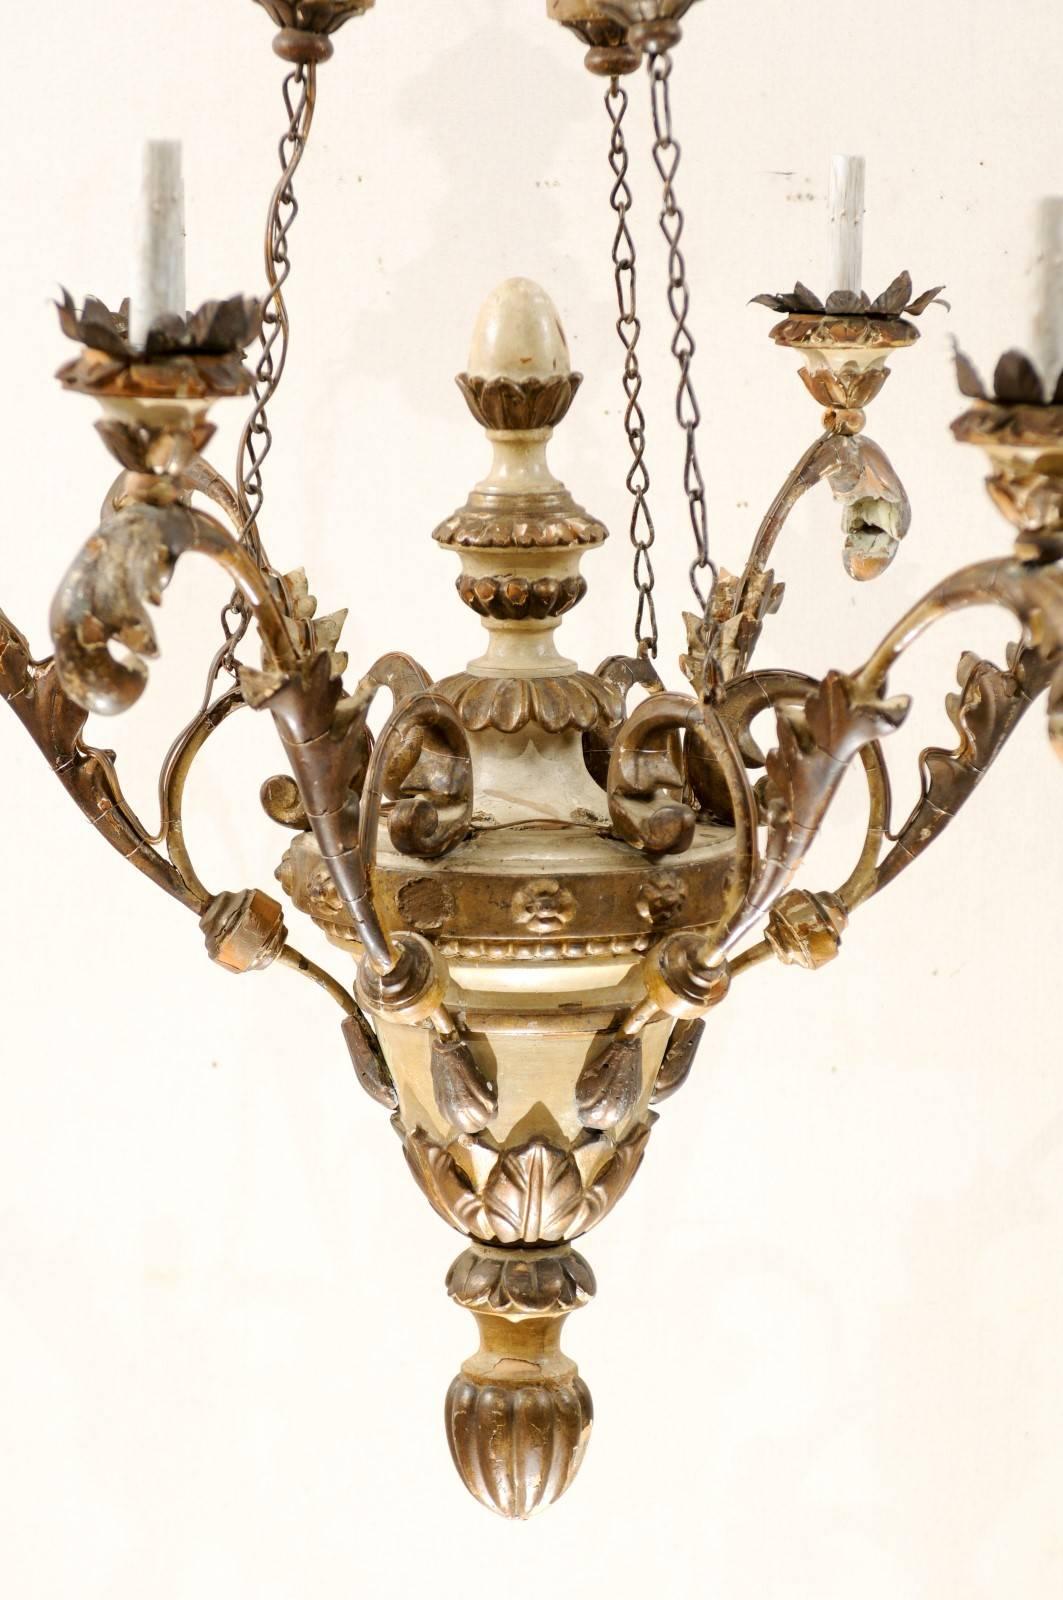 An Exquisite Pair of Italian Early 20th C. Carved & Painted Wood Chandeliers 1